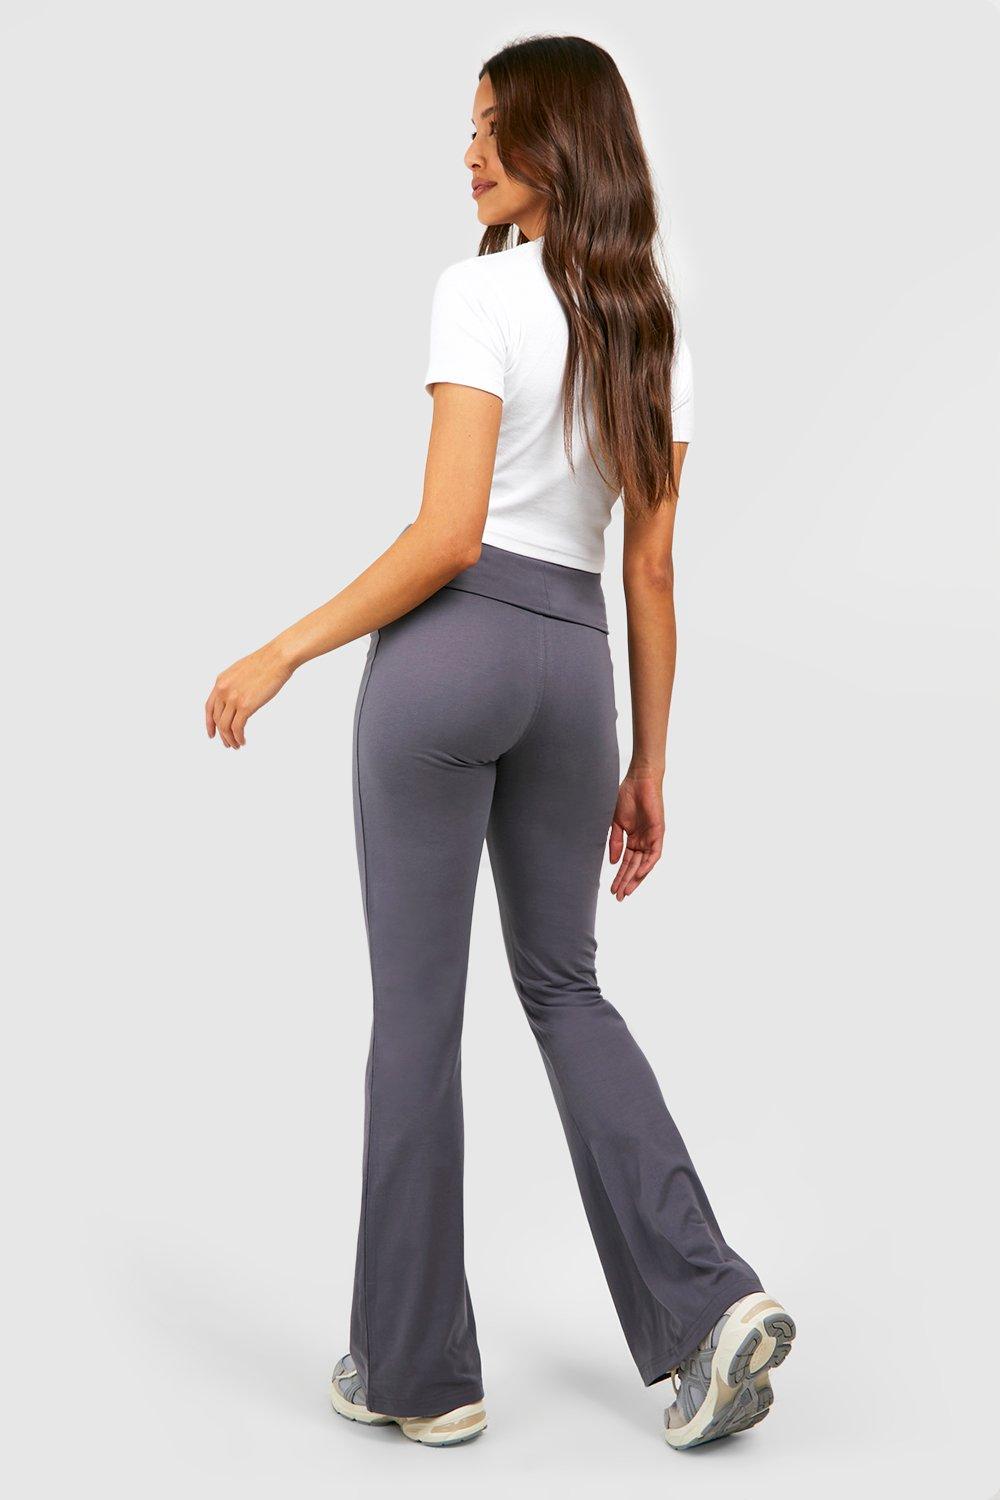 Jersey Yoga Pants for Girls